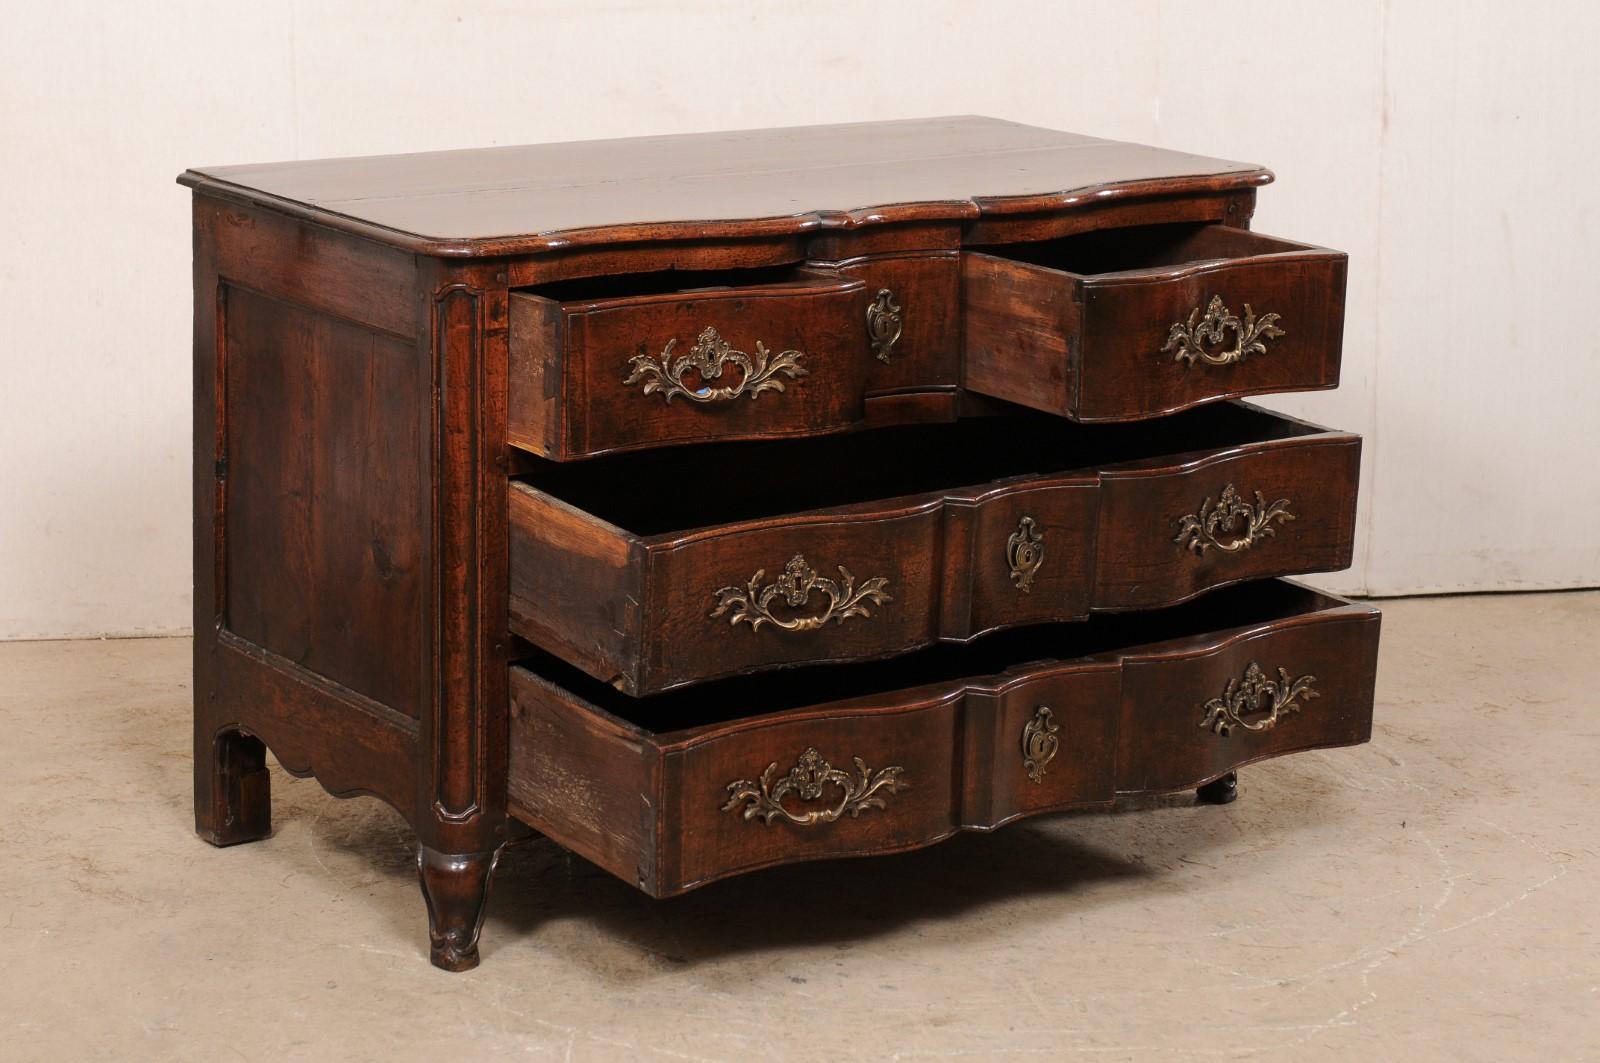 18th Century and Earlier Rococo Period Serpentine Carved-Wood Chest of Drawers, 18th Century, France For Sale